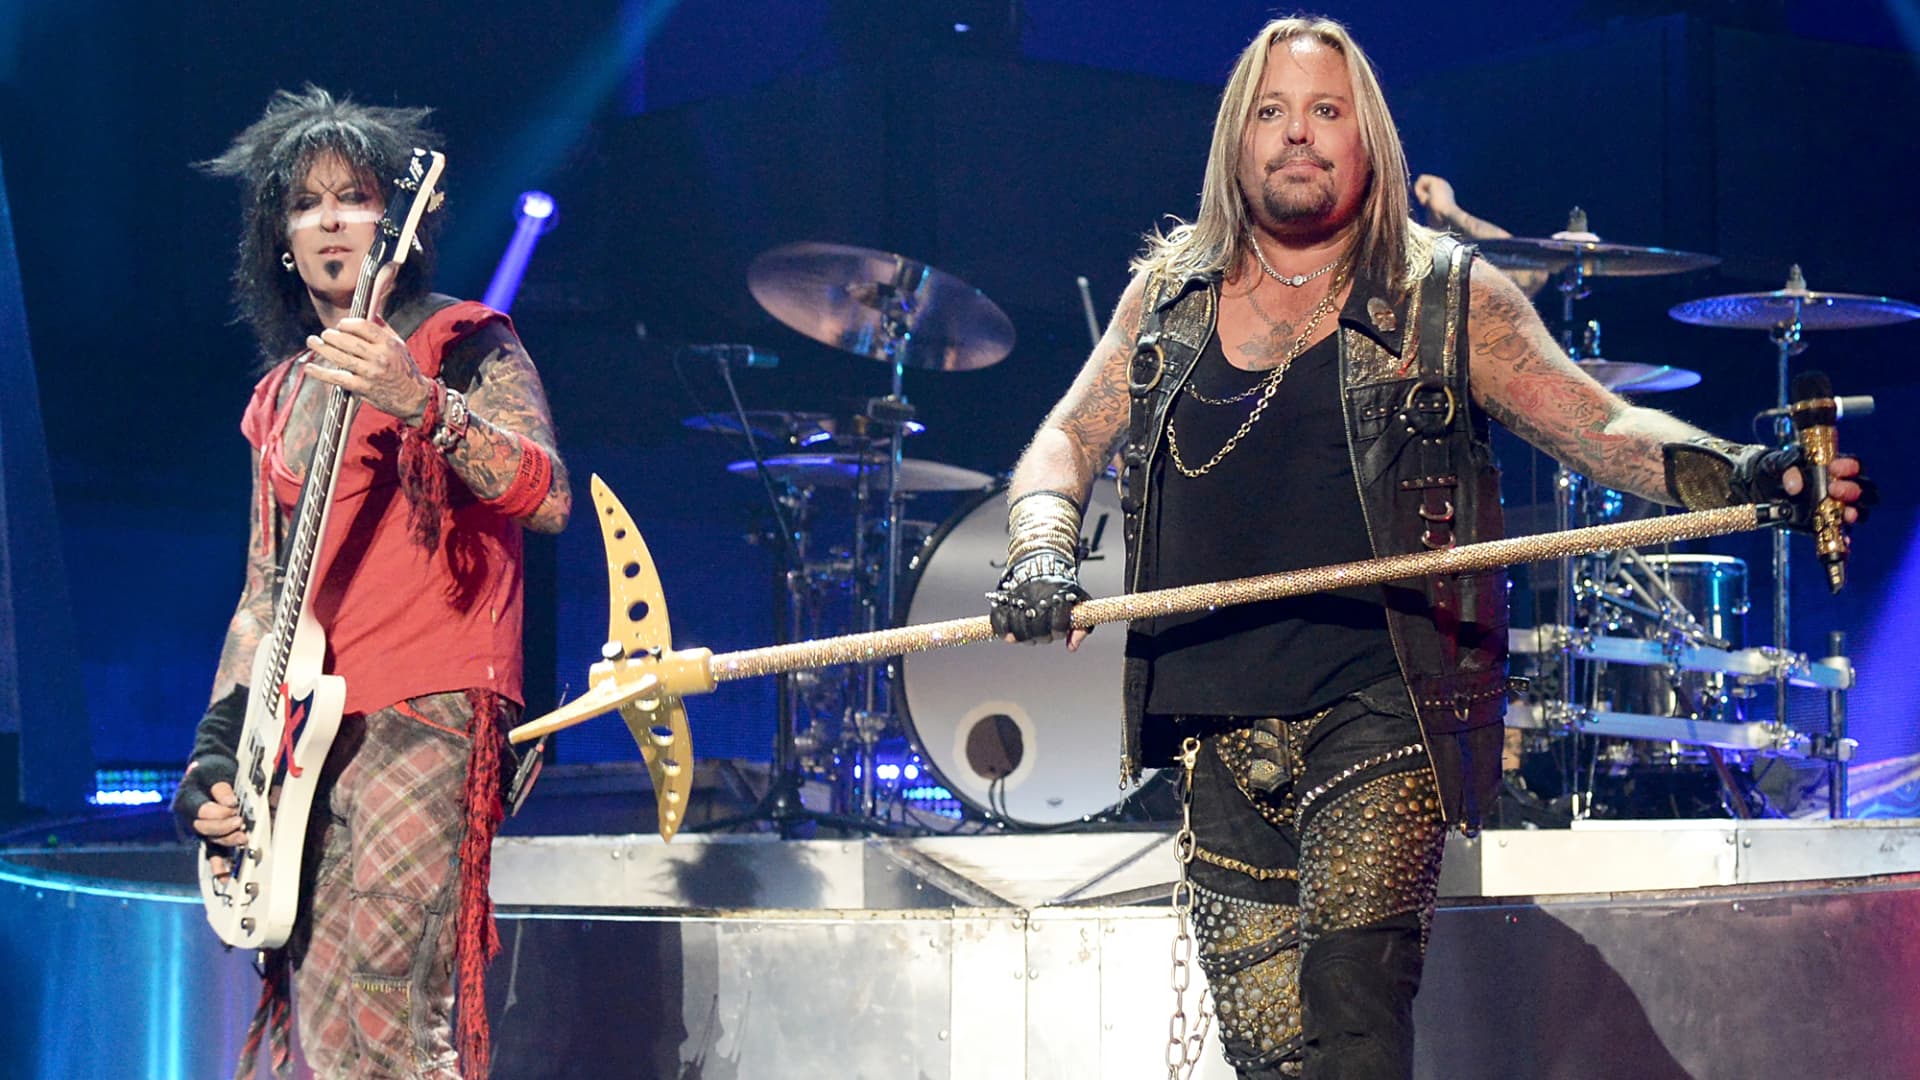 We want to go out on top: Motley Crue